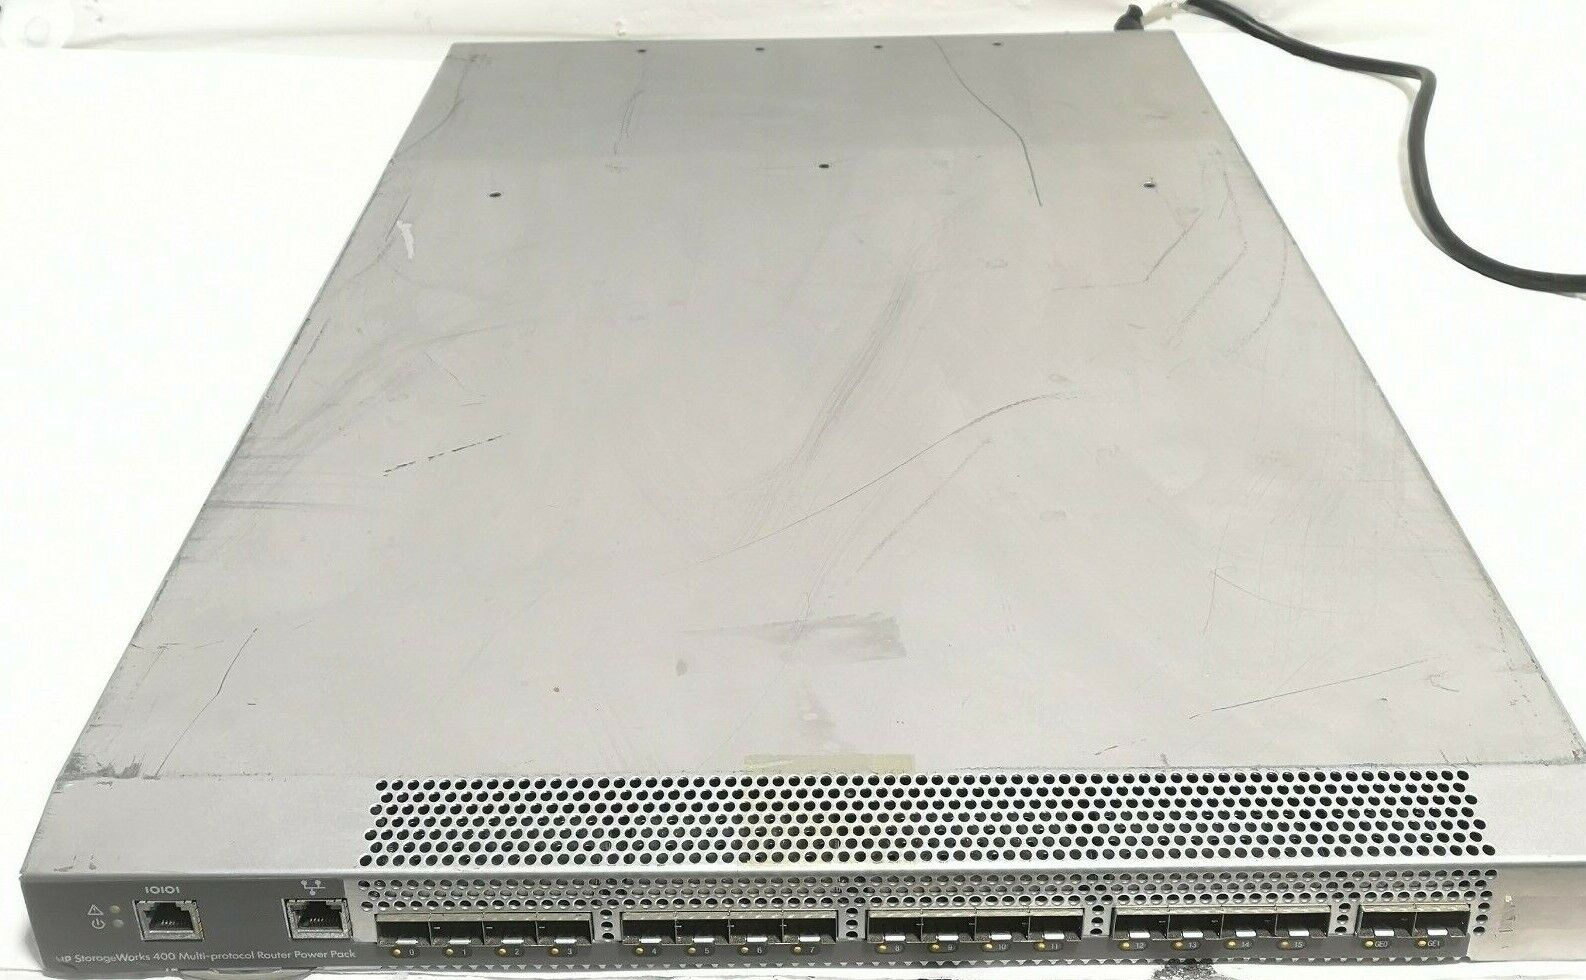 HP StorageWorks 400 Multi-Protocol Router Power Pack 